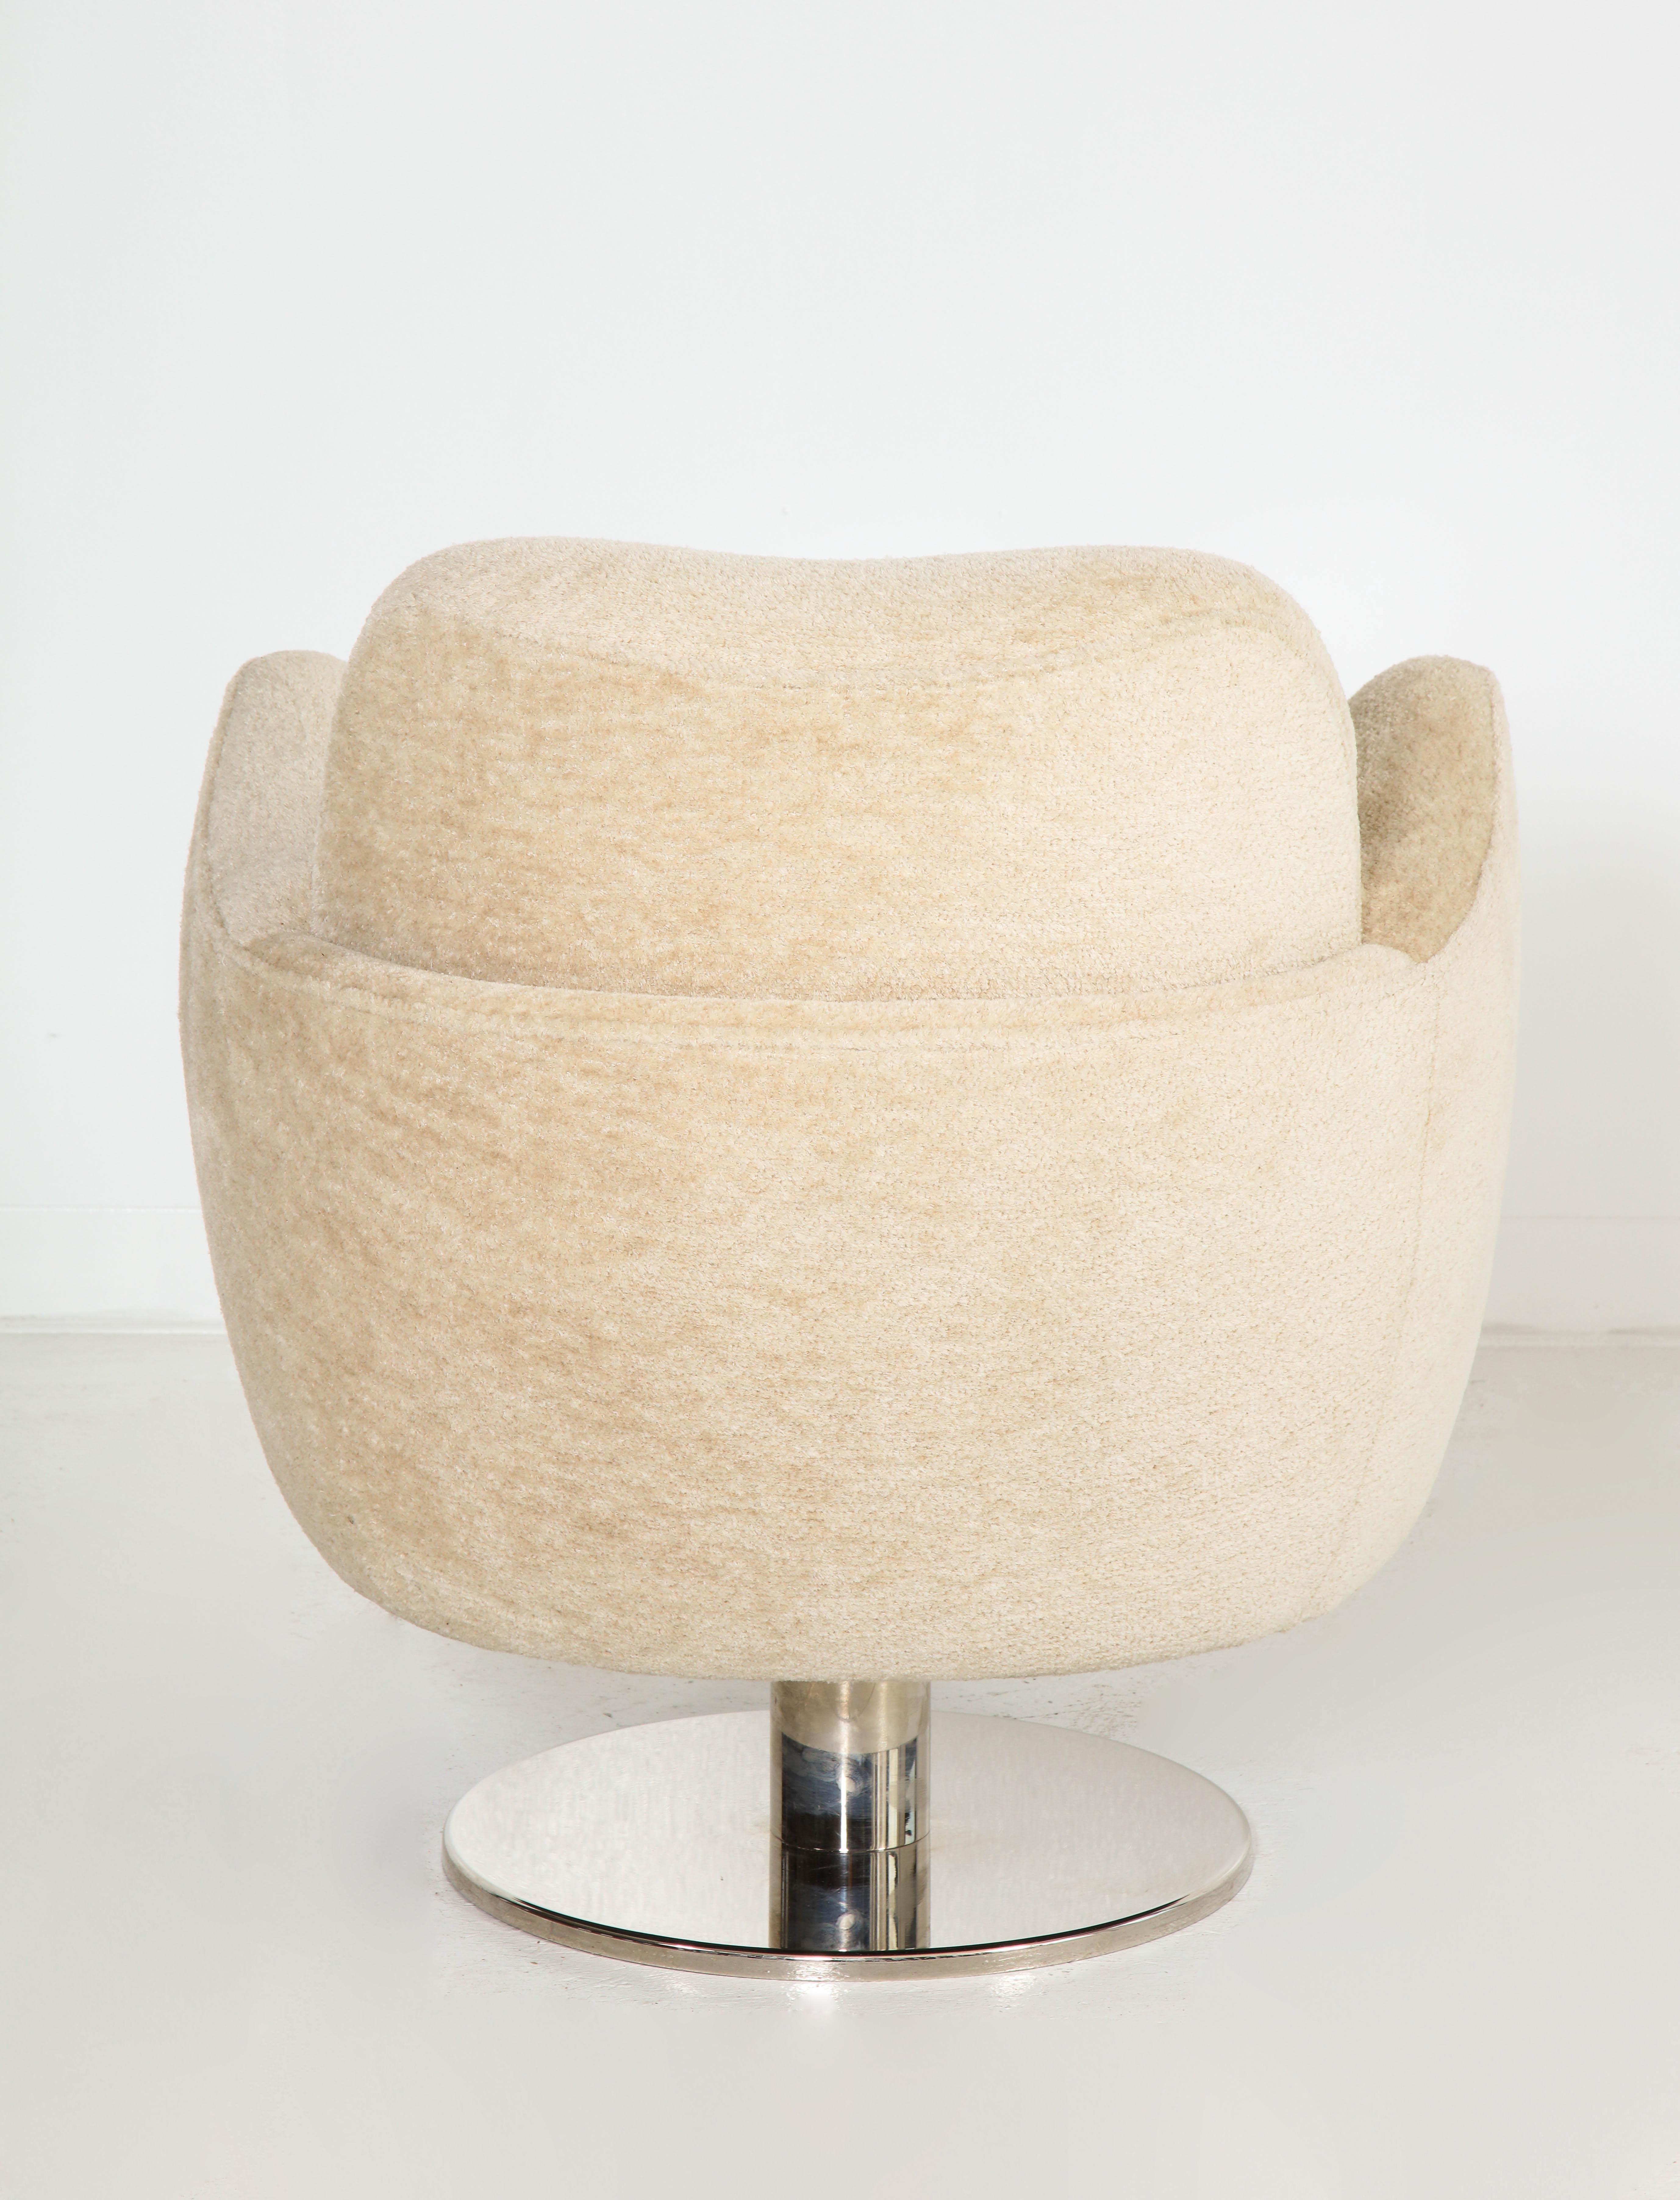 Contemporary Wrap Around Swivel Barrel Chair Offered by Vladimir Kagan Design Group